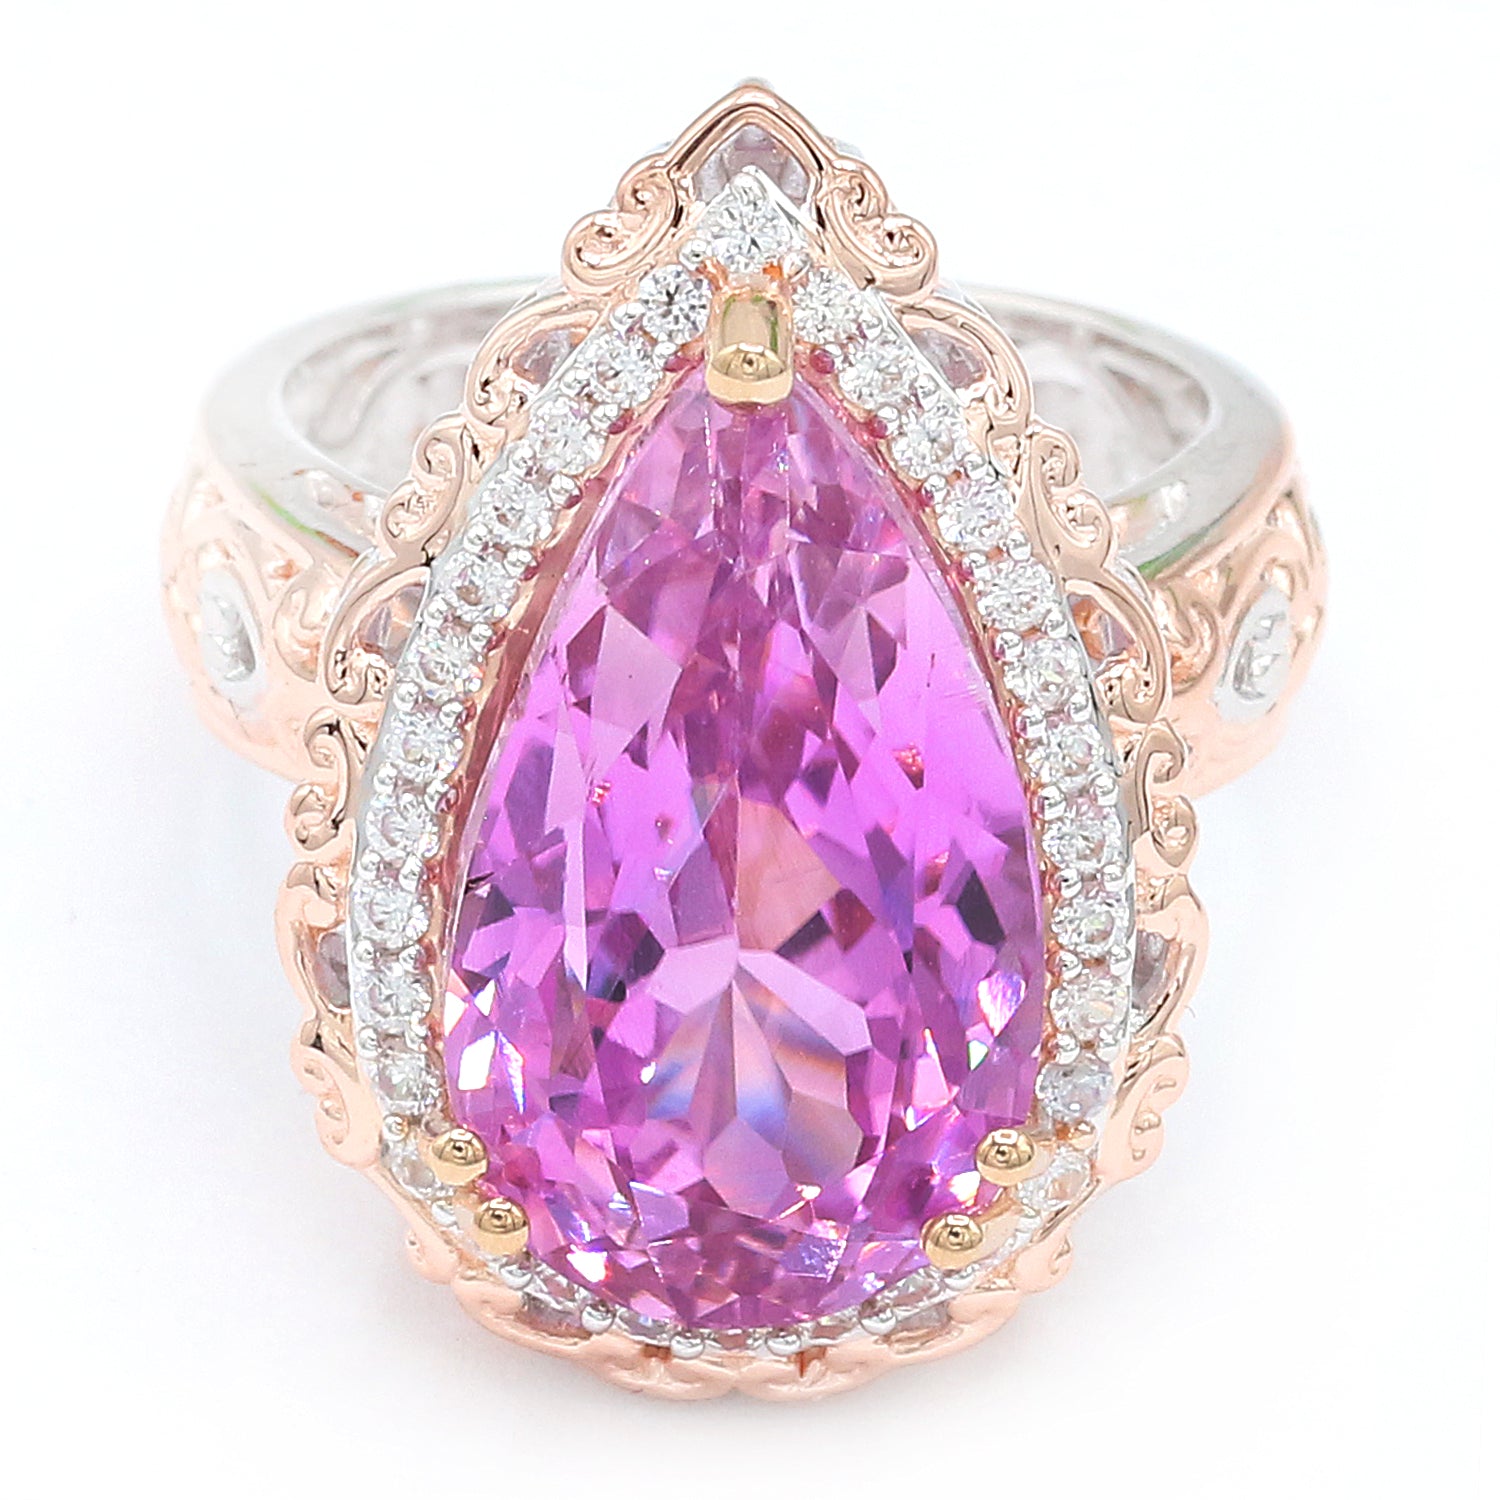 Limited Edition Gems en Vogue Luxe One-of-a-Kind 16.87ctw Kunzite & White Zircon Ring